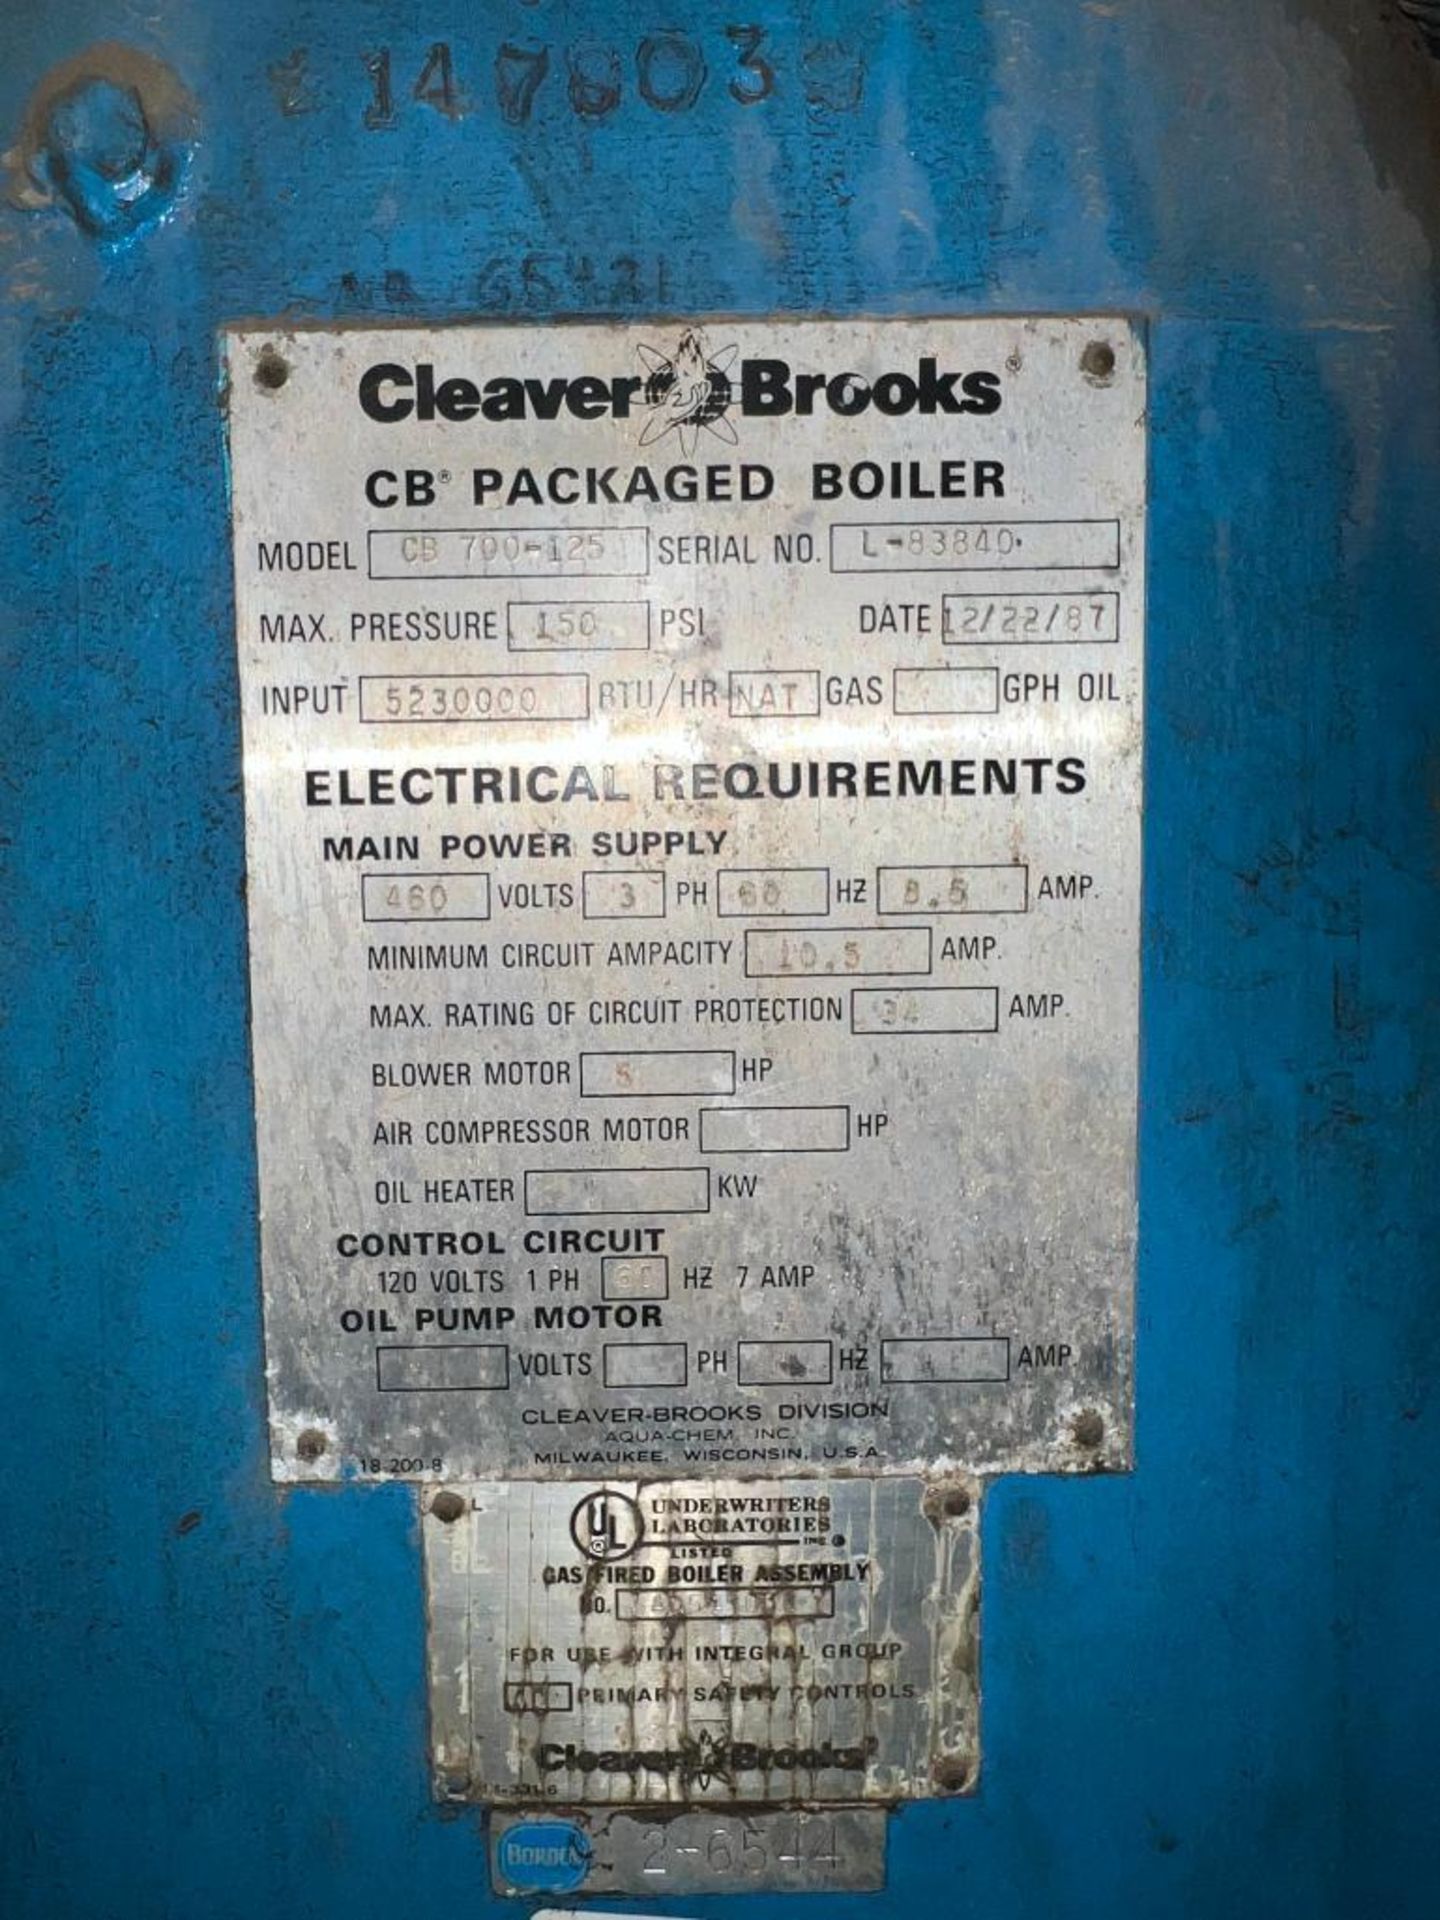 Cleaver Brooks 150 PSI Natural Gas CB Packaged Boiler, Model: CB700-125, S/N: L-83840 with Honeywell - Image 6 of 6